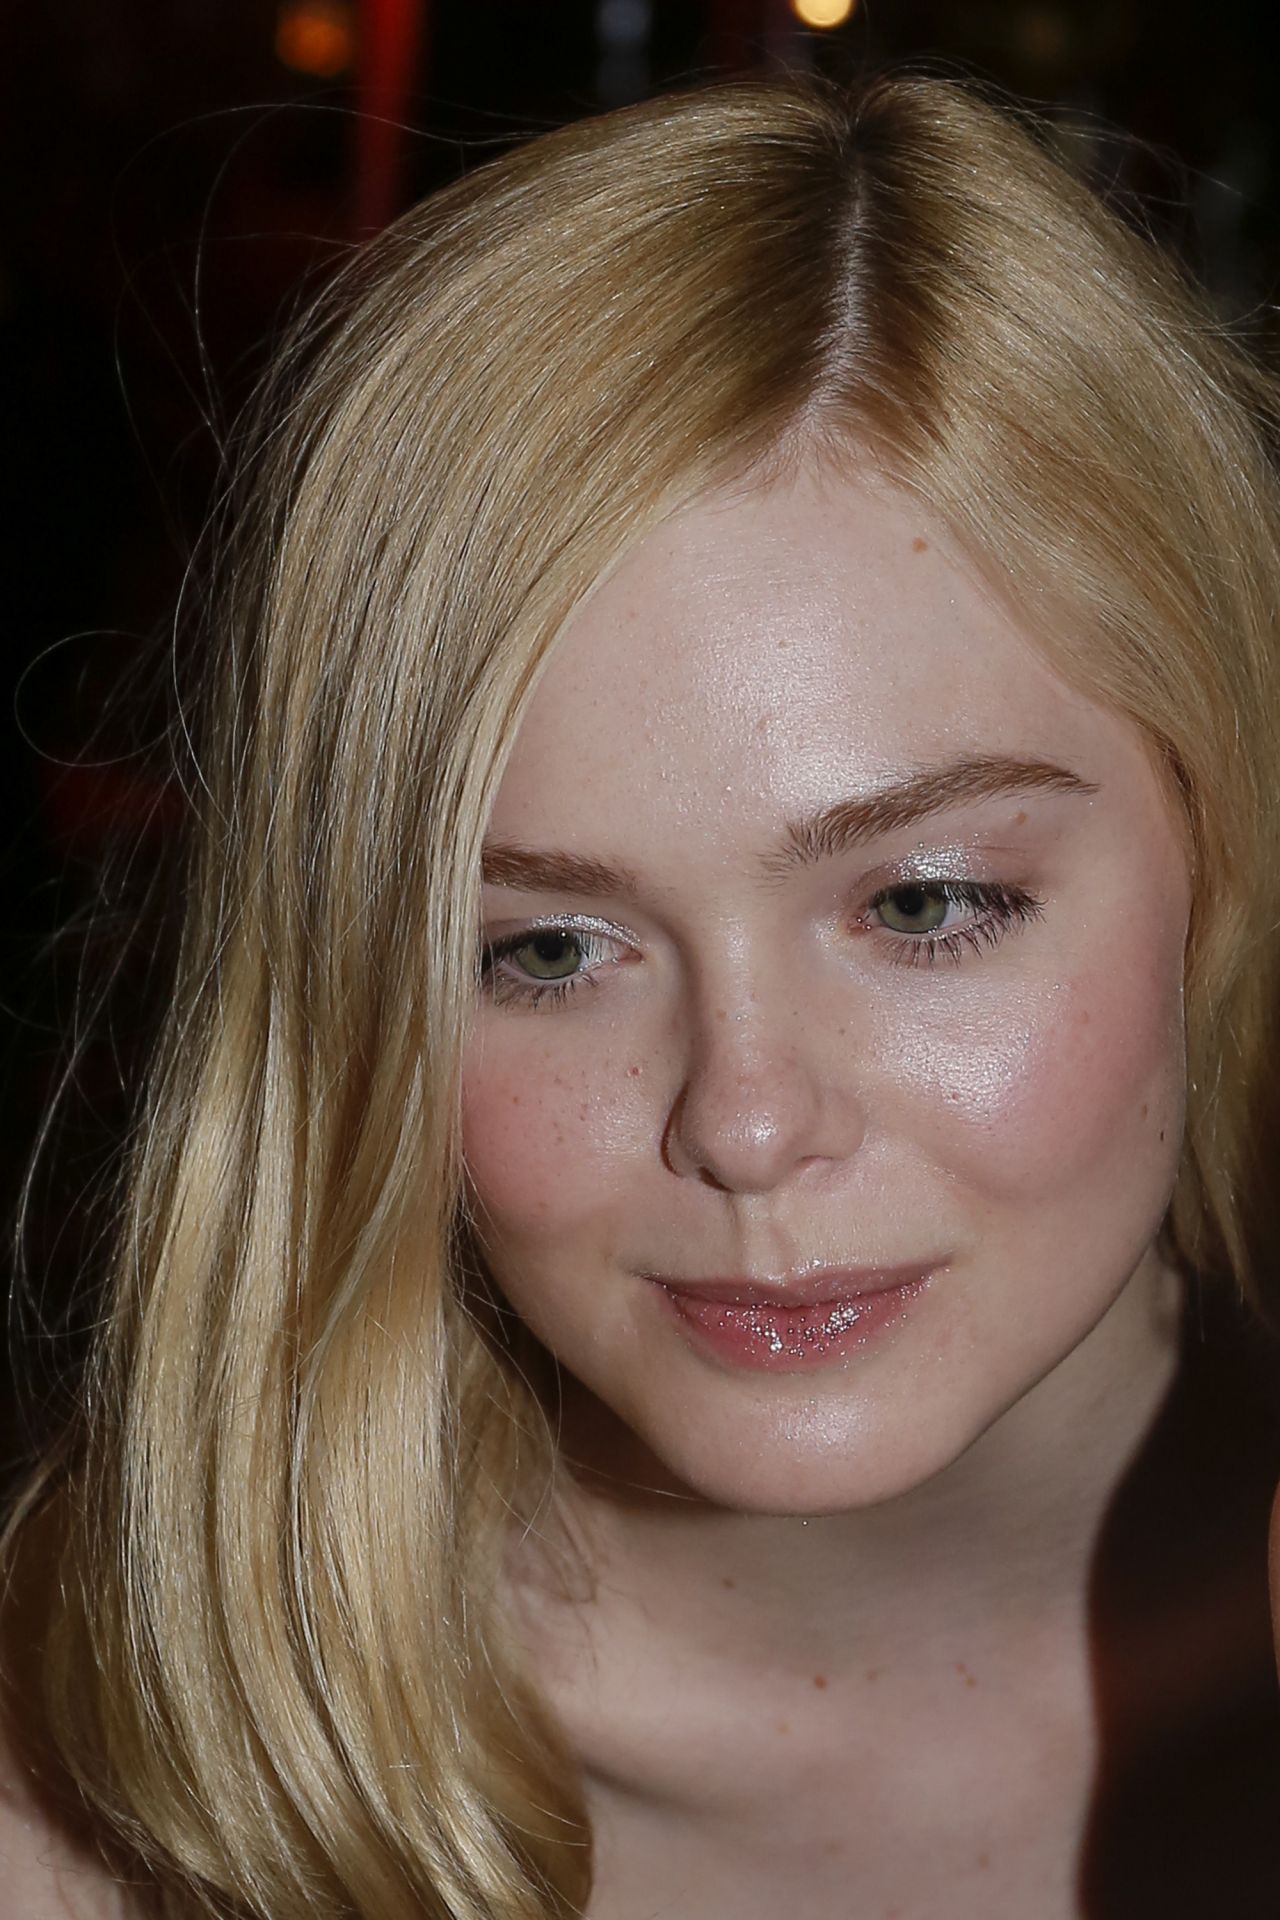 elle-fanning-arriving-at-chanel-party-in-cannes-05-22-2019-4.jpg